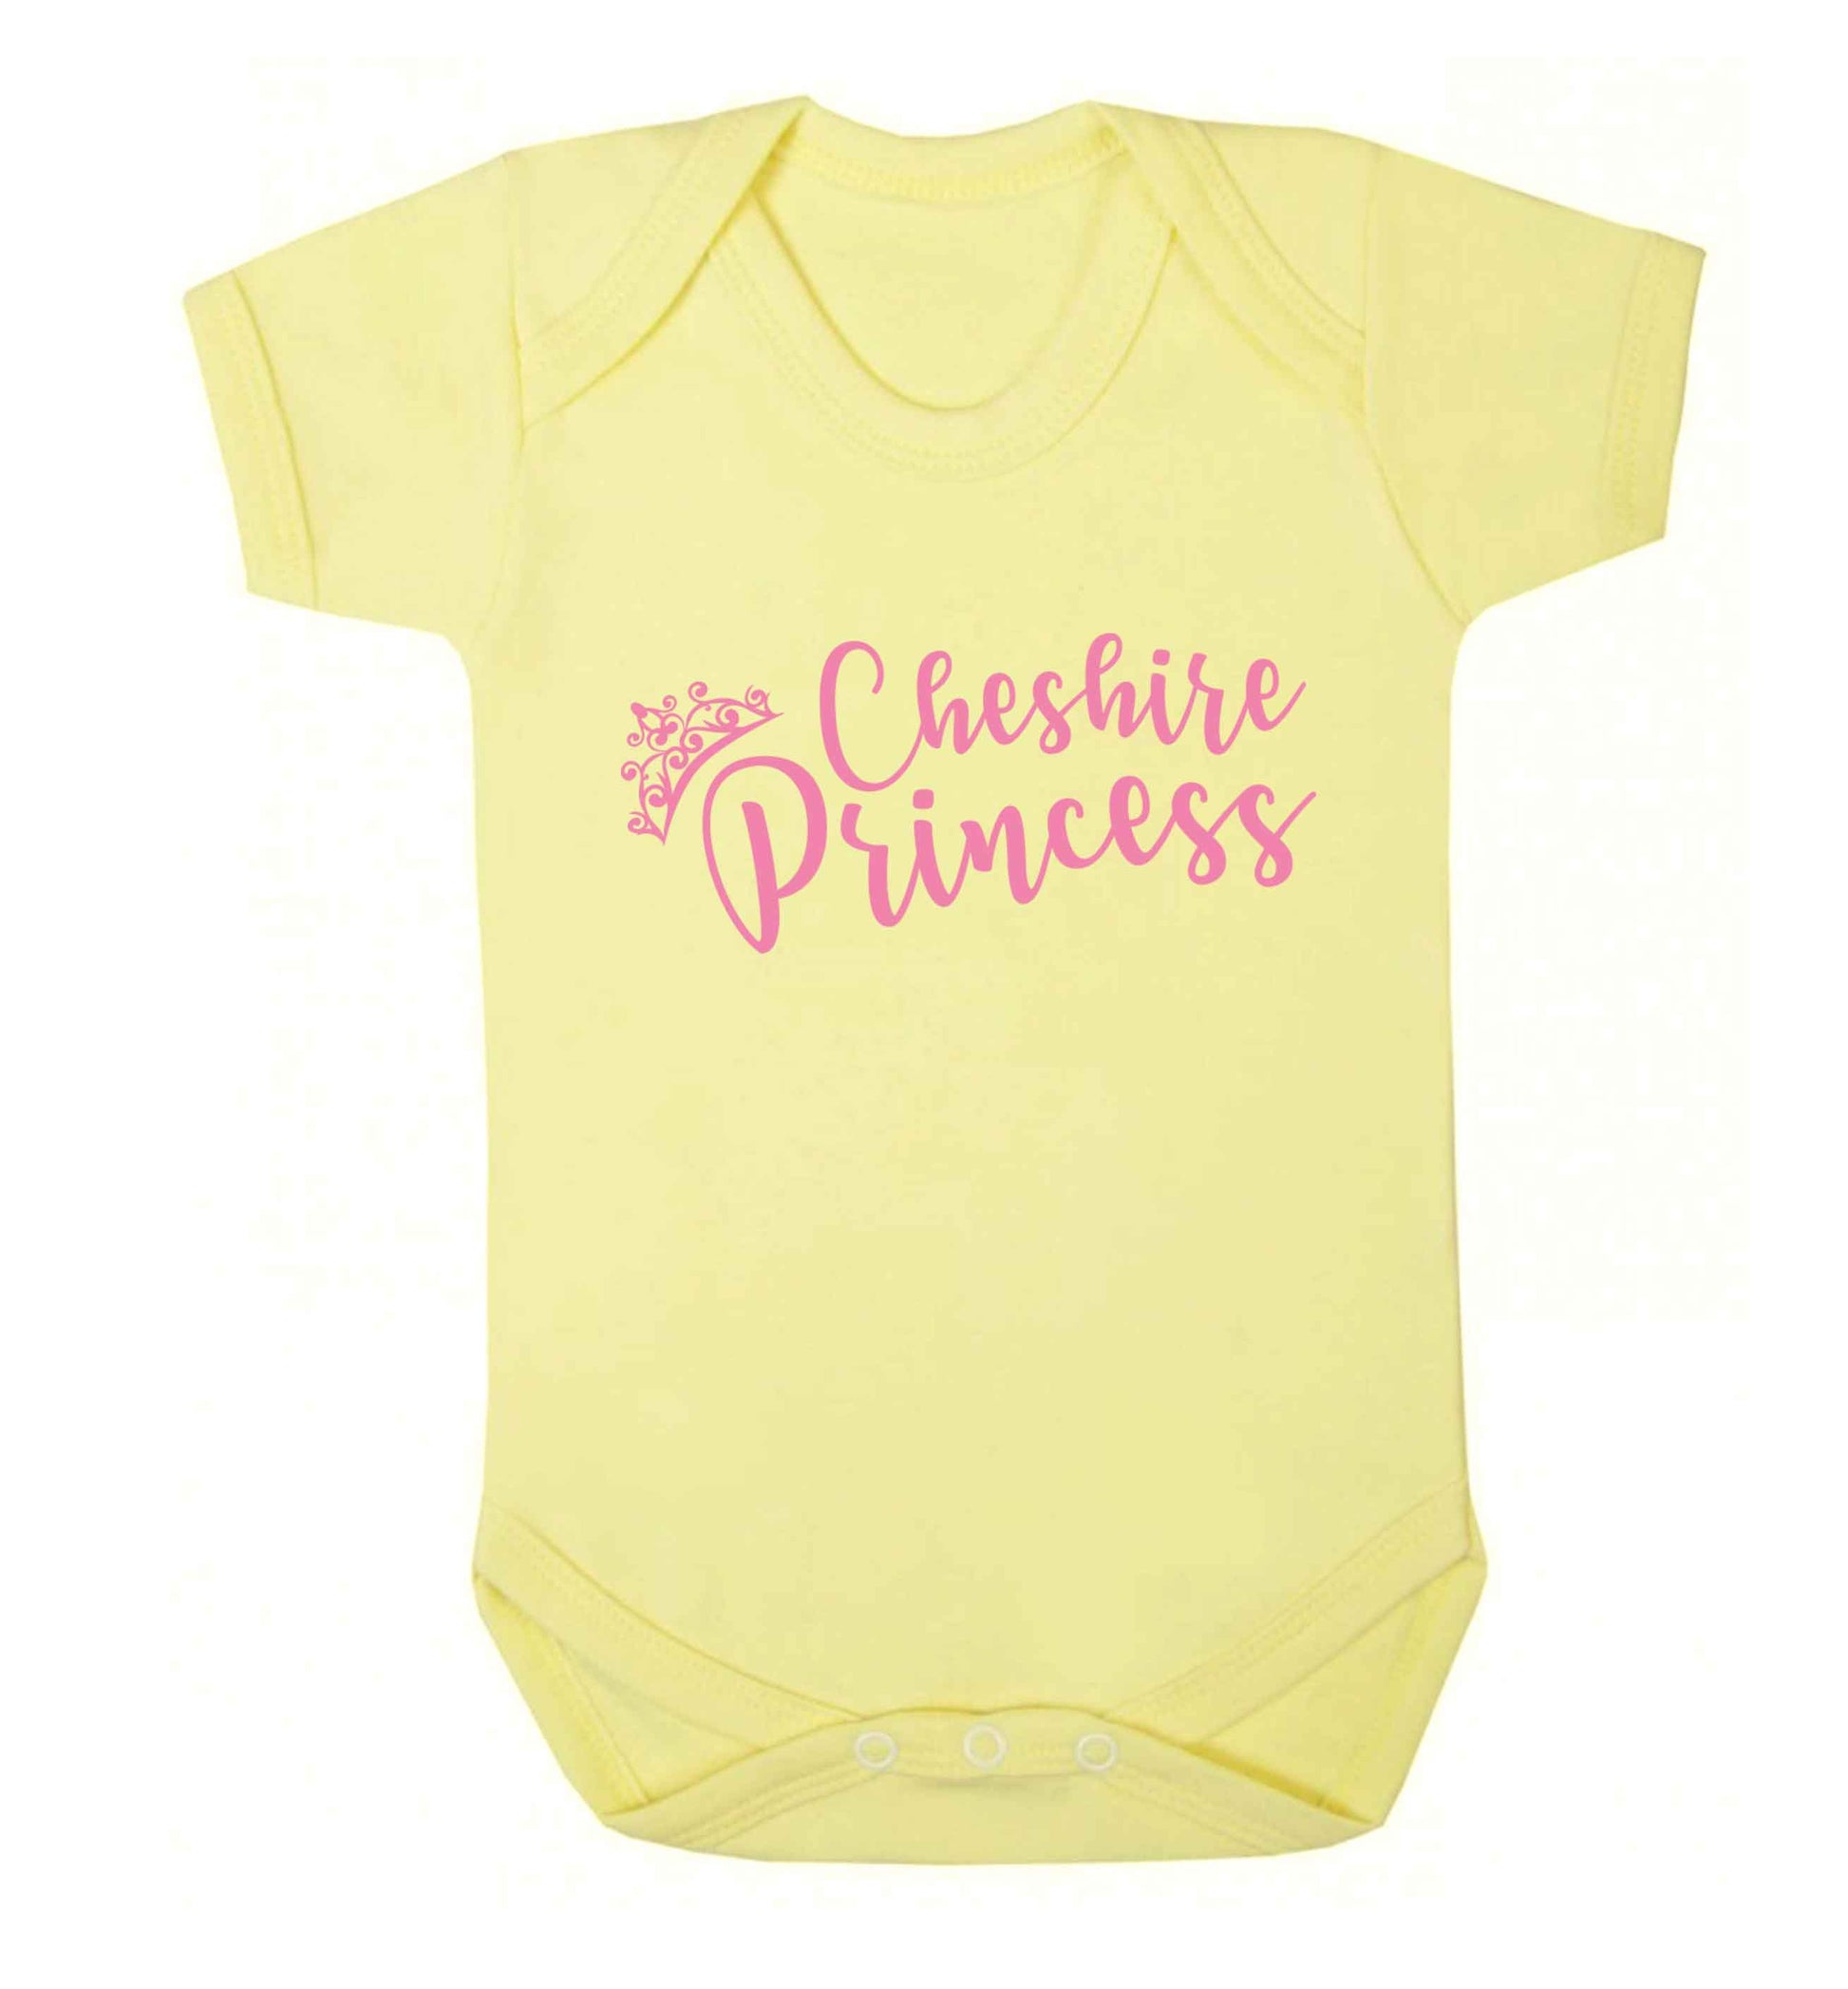 Cheshire princess Baby Vest pale yellow 18-24 months